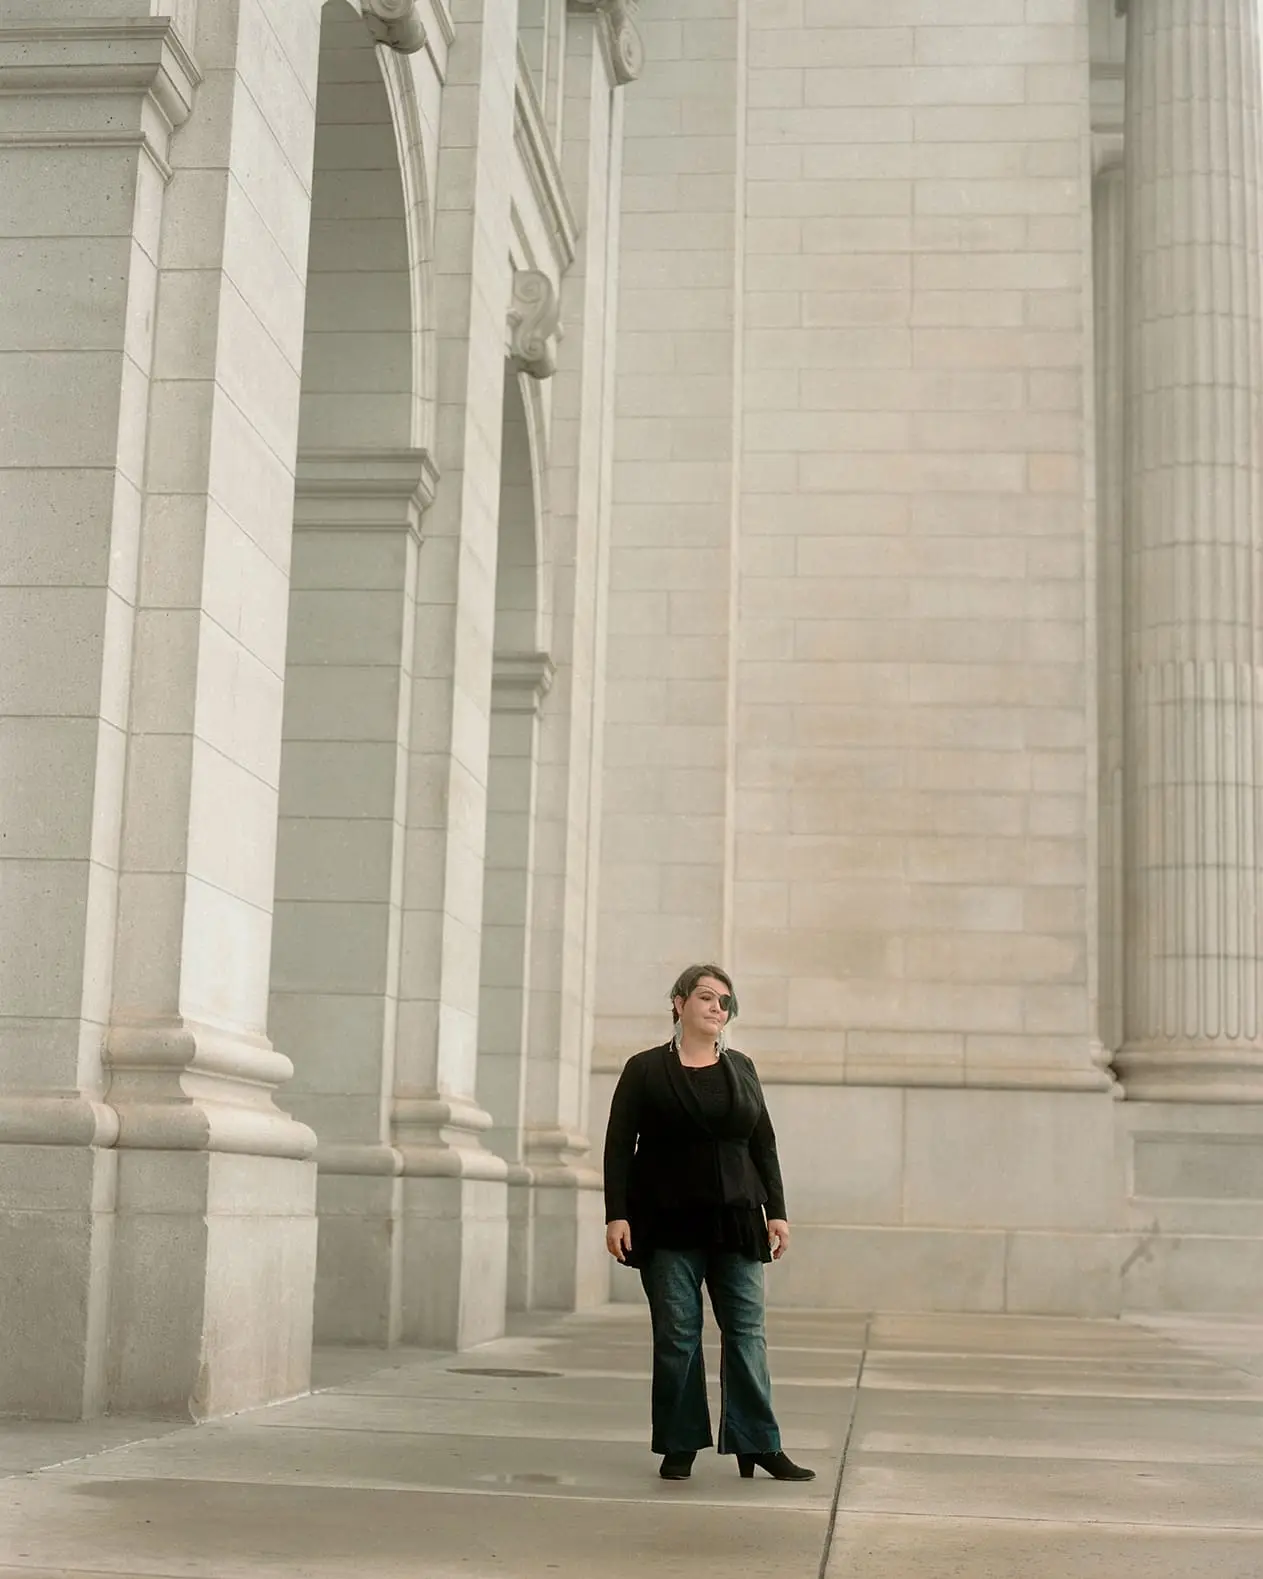 Linda Tirado stands outside Washington, D.C.'s Union Station in 2022. After being shot in the eye with a 40mm foam-tipped bullet, she was left half blind and suffering from a traumatic brain injury.